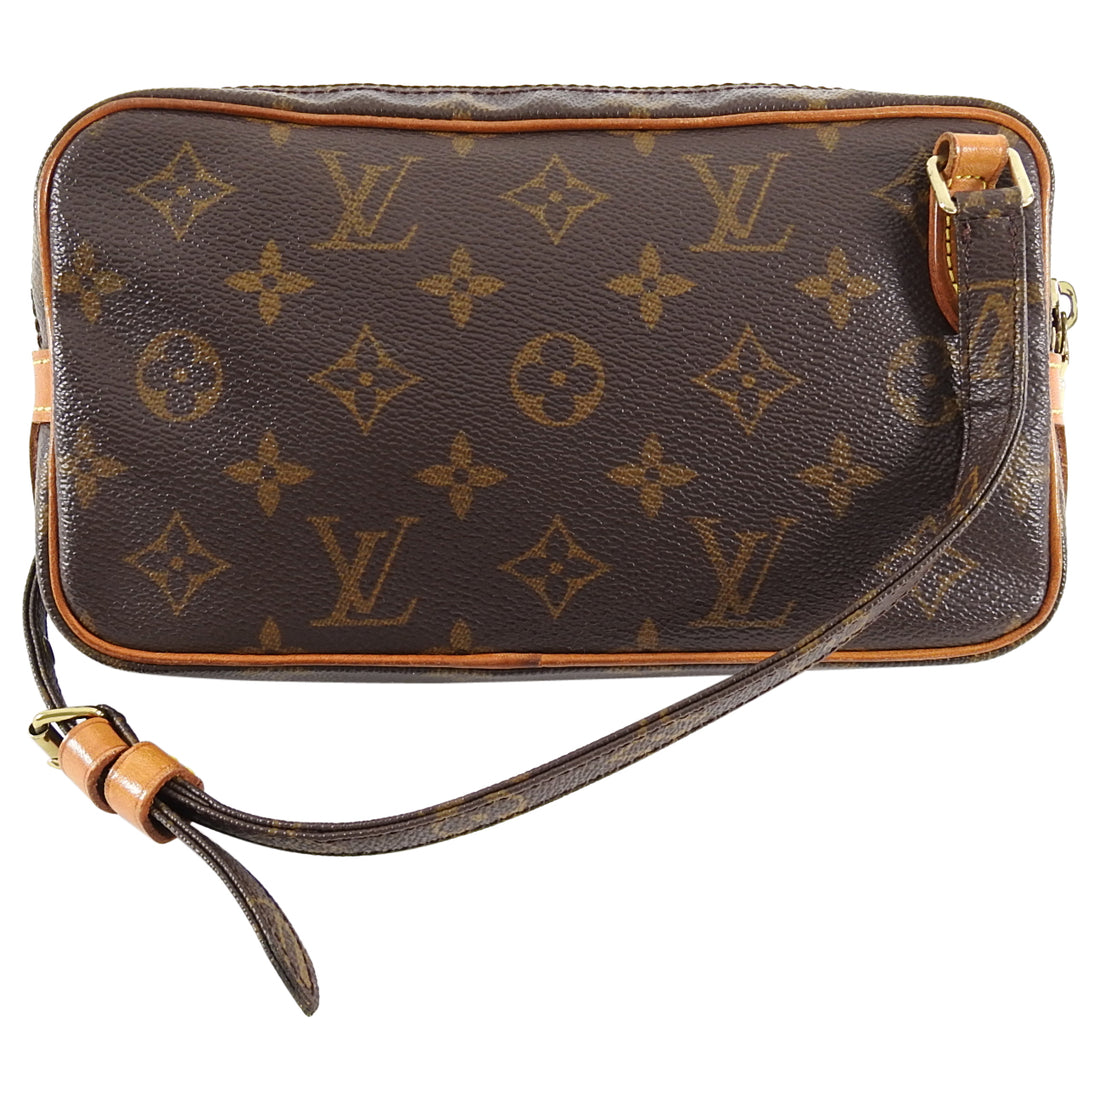 Louis Vuitton Vintage 2000 Monogram Marly Bandouliere Crossbody Bag – I MISS YOU VINTAGE